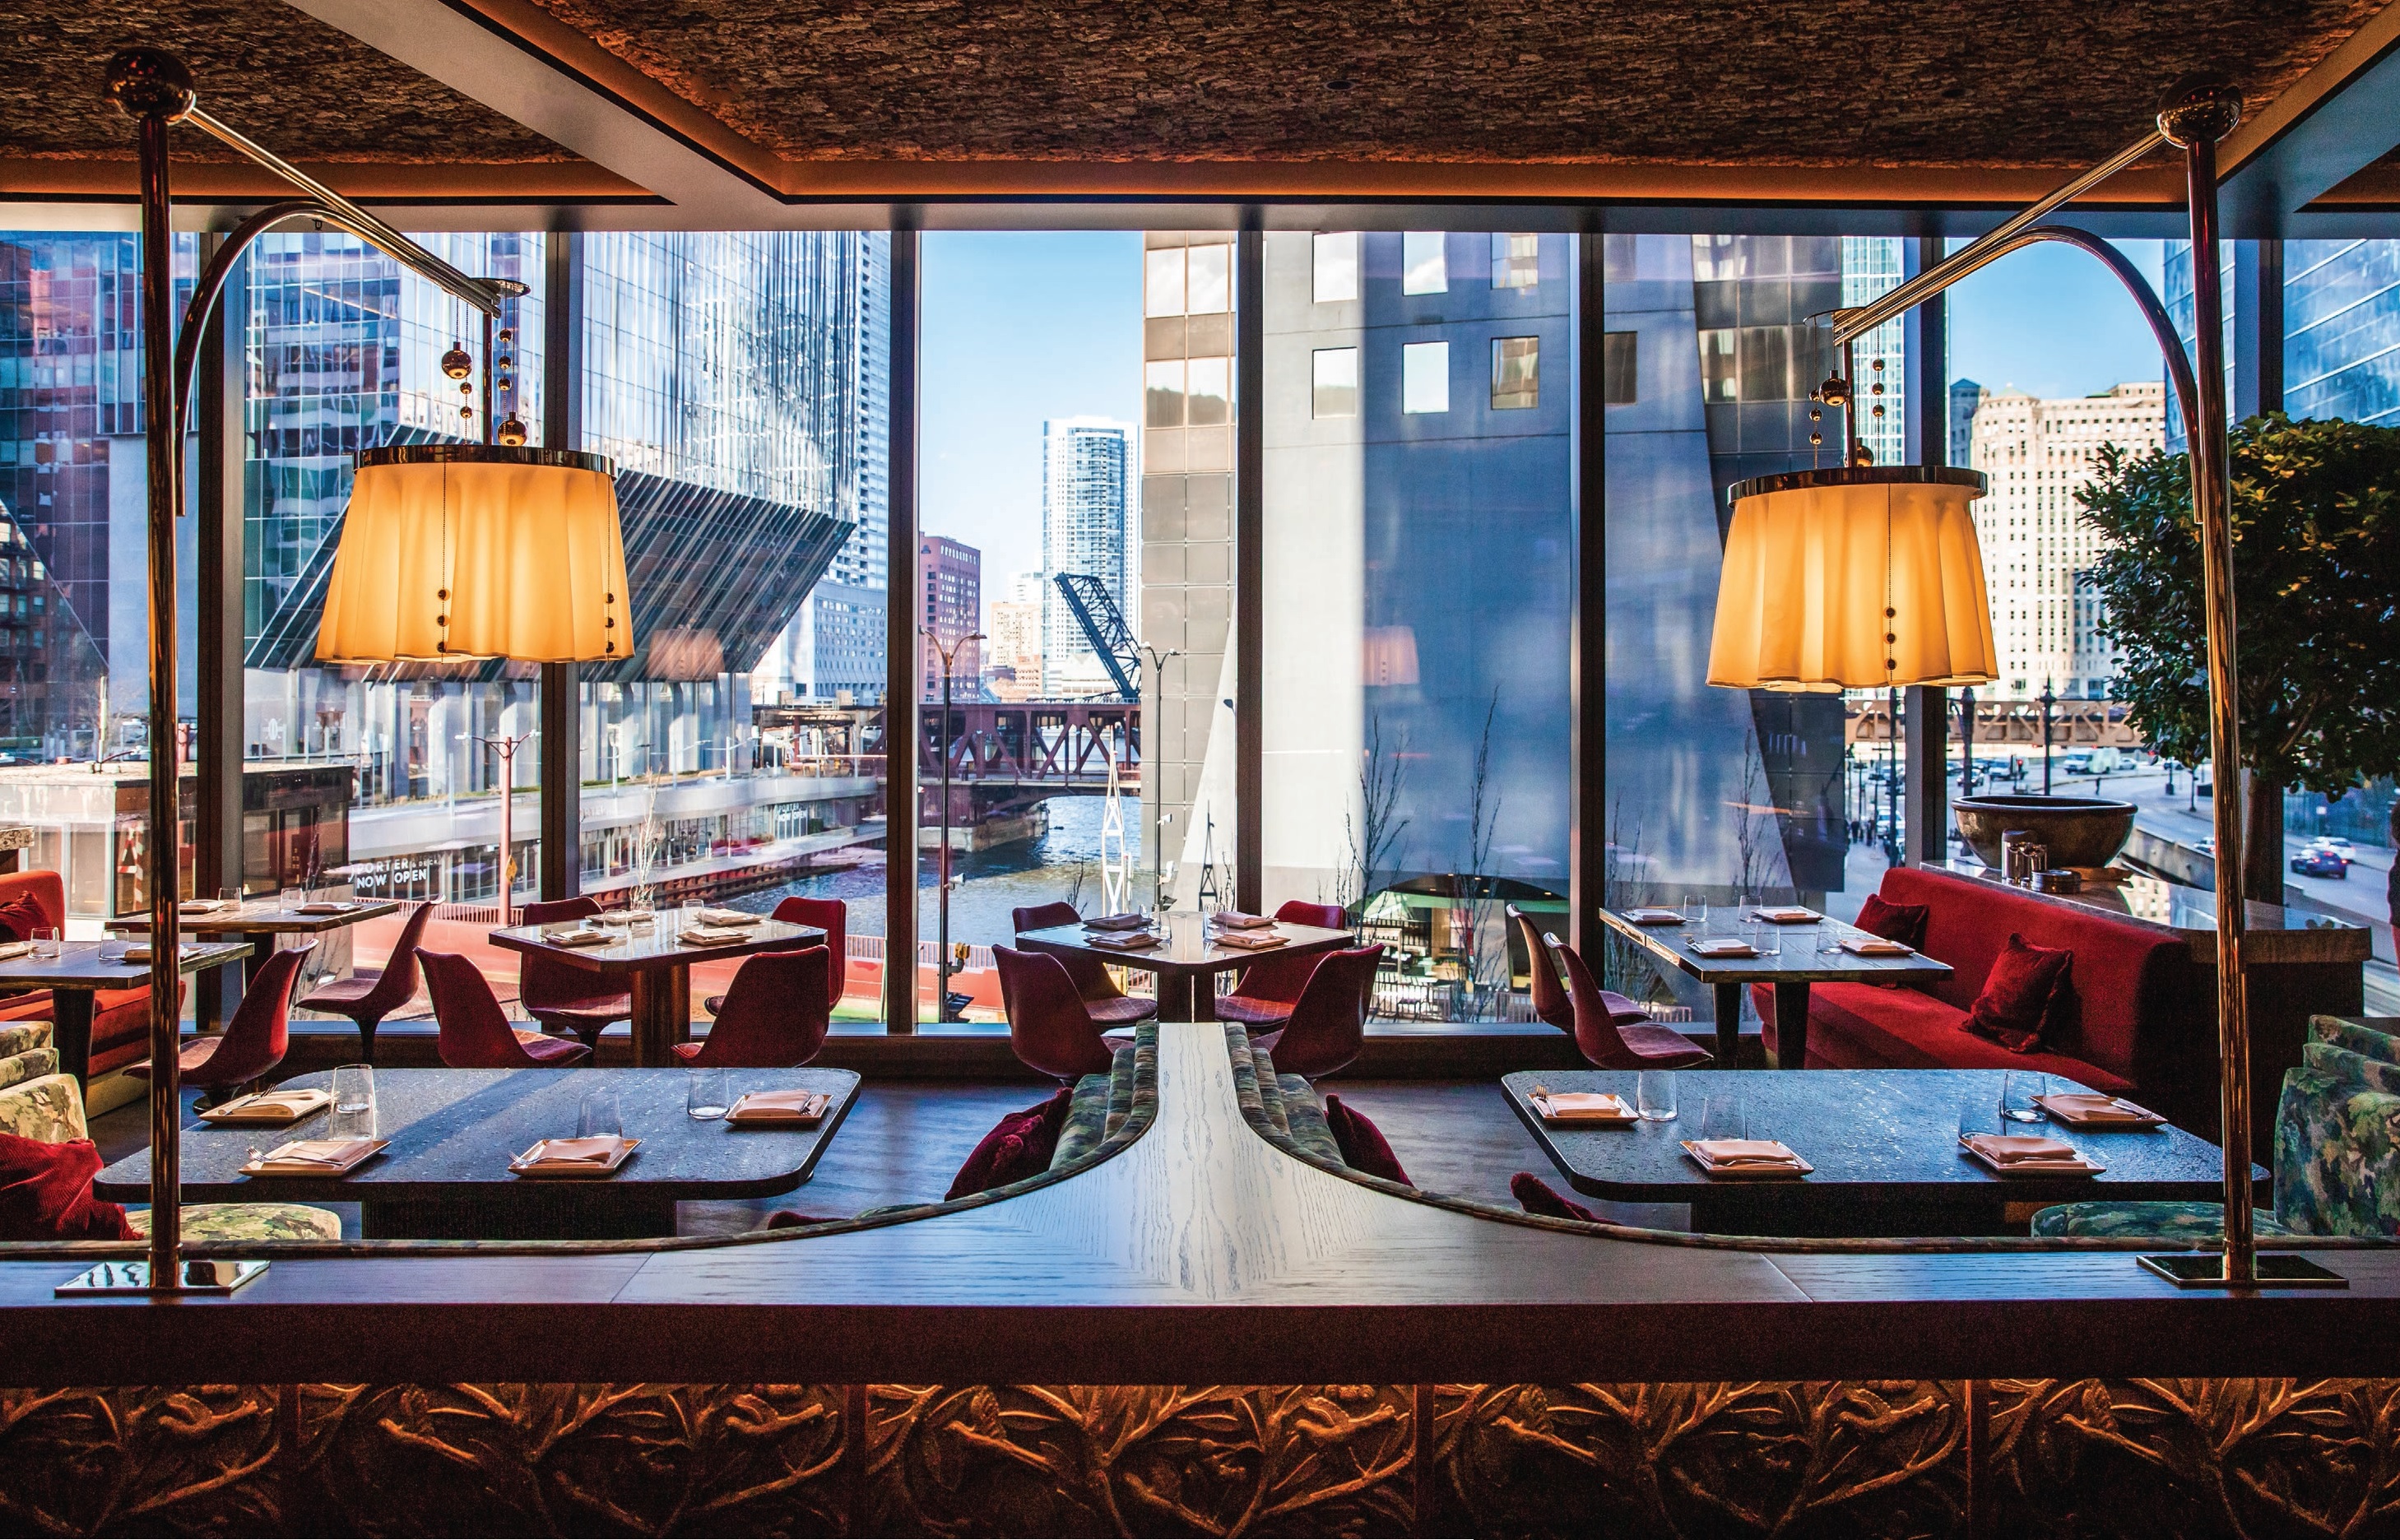 Bazaar Meat’s sultry second-floor dining room beckons with picturesque river views PHOTO BY: GARRETT SWEET